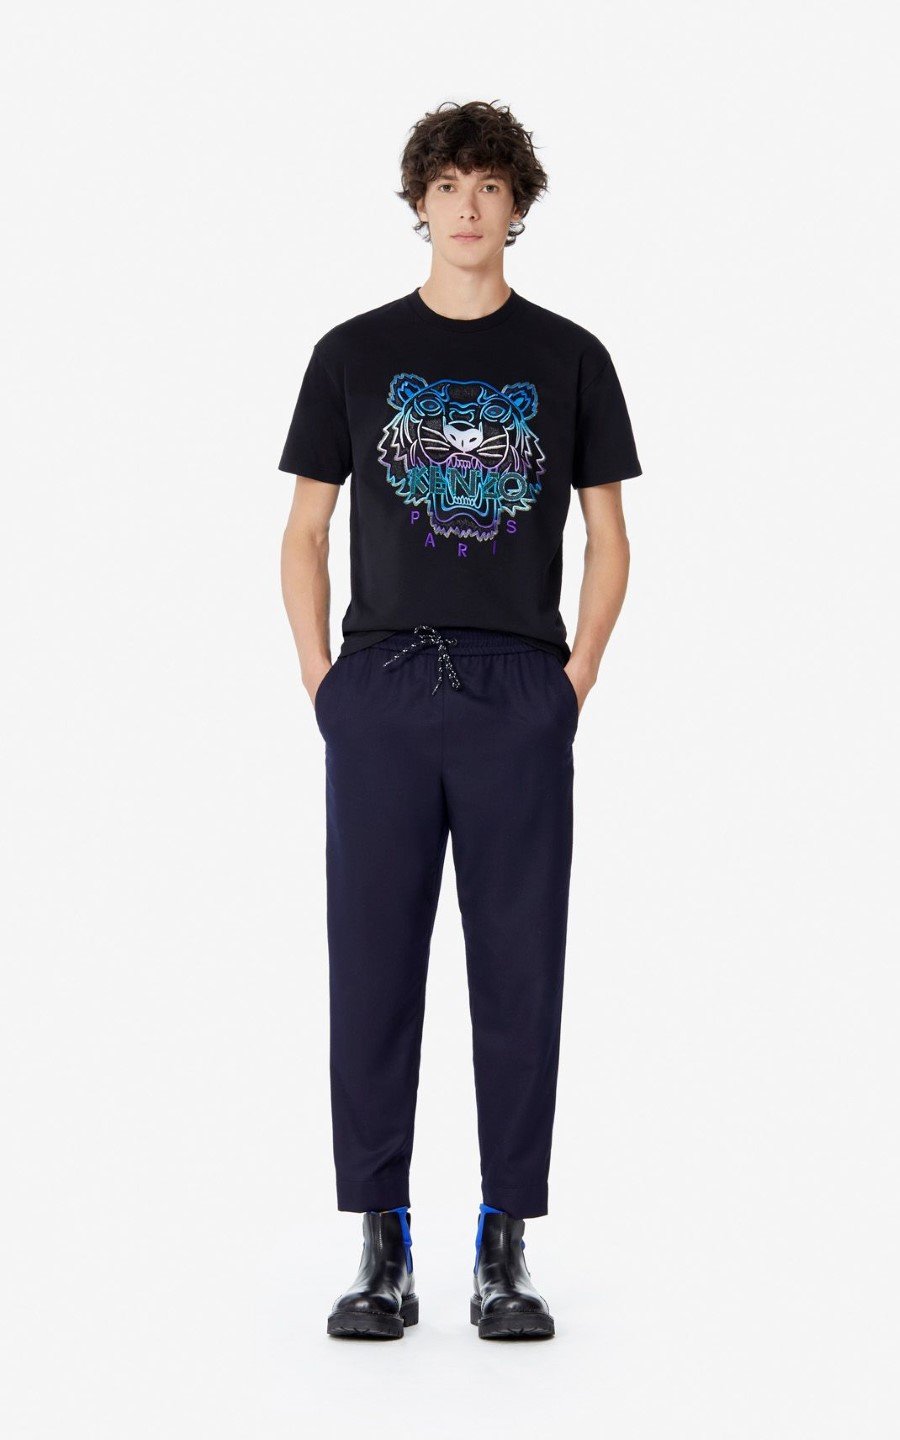 KENZO Collection HOLIDAY CAPSULE 2019